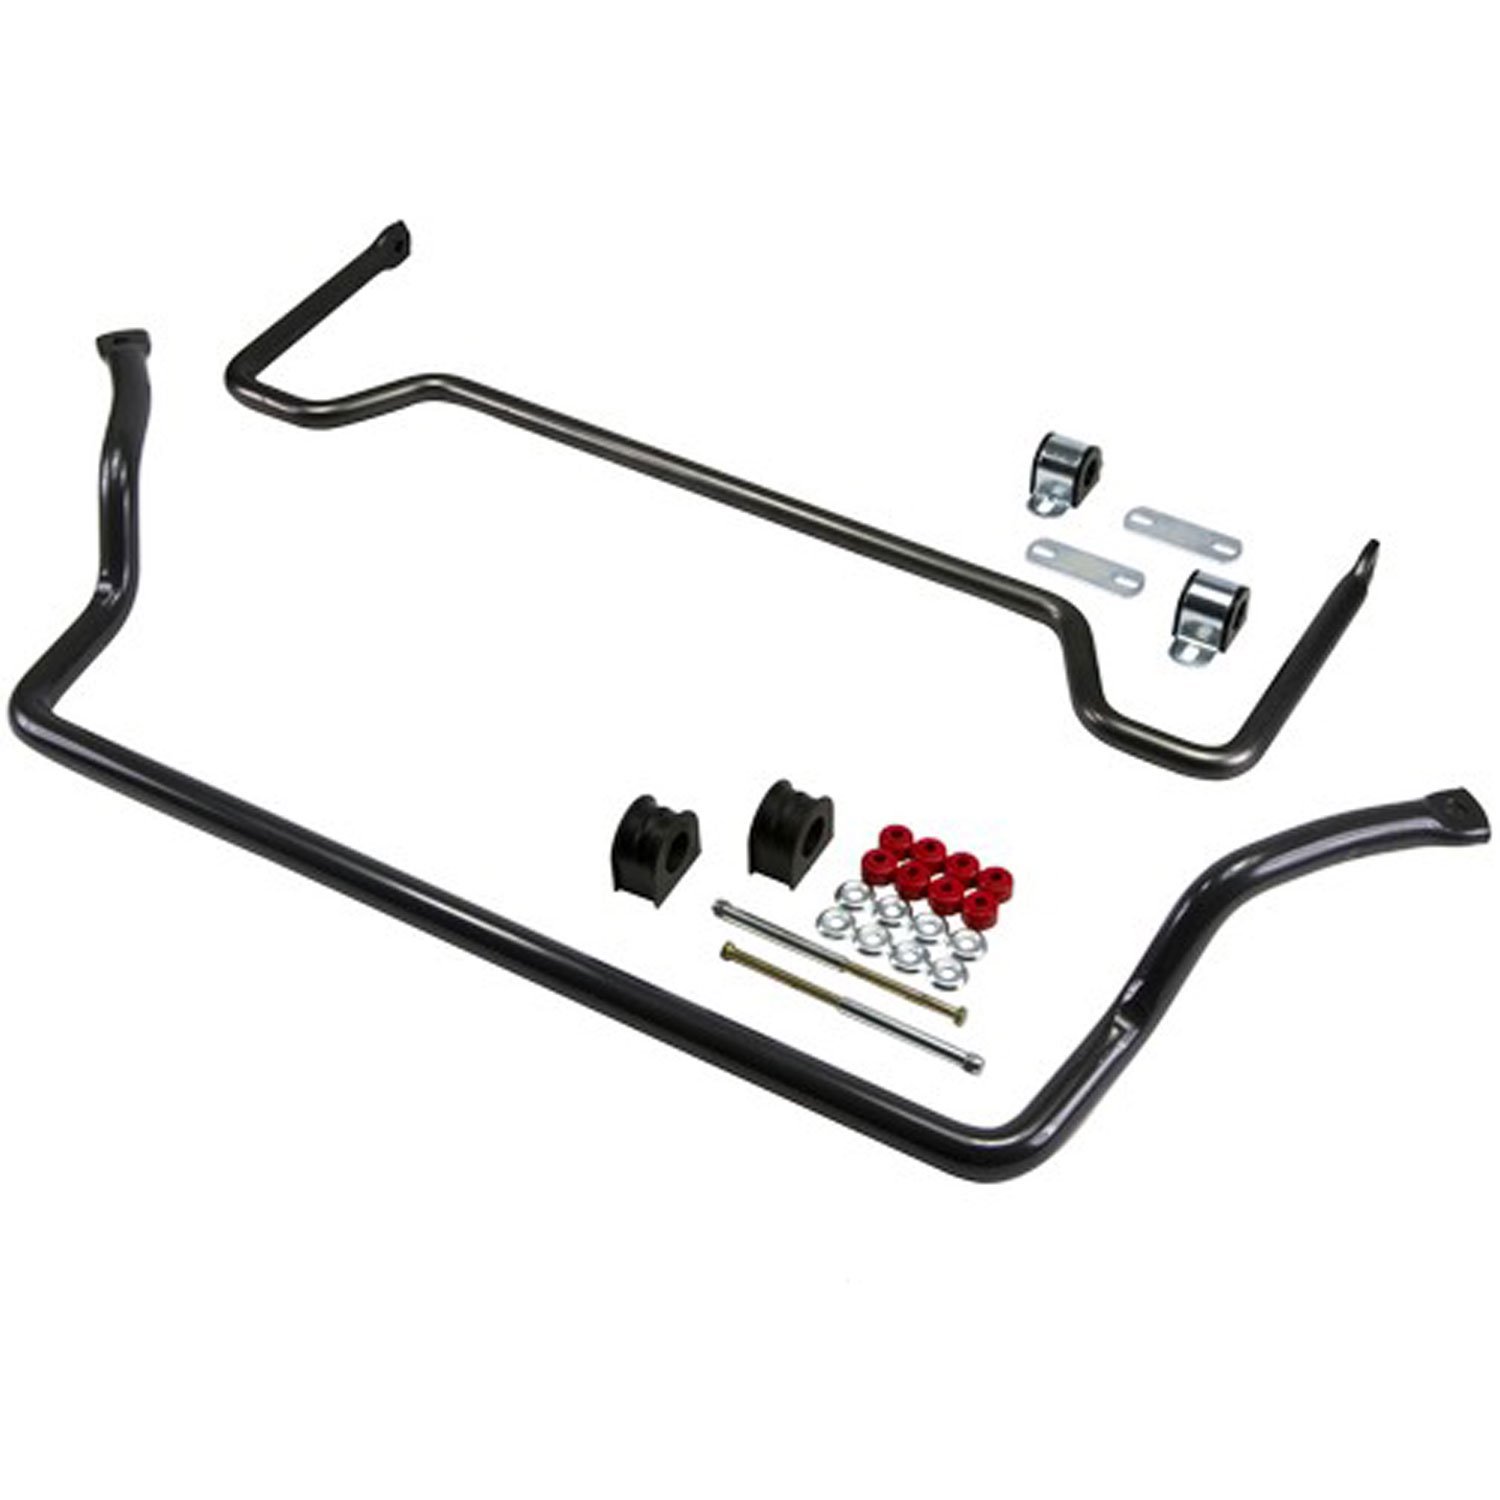 Front/Rear Sway Bar Kit for 1997-2002 Ford Expedition/Navigator 2WD